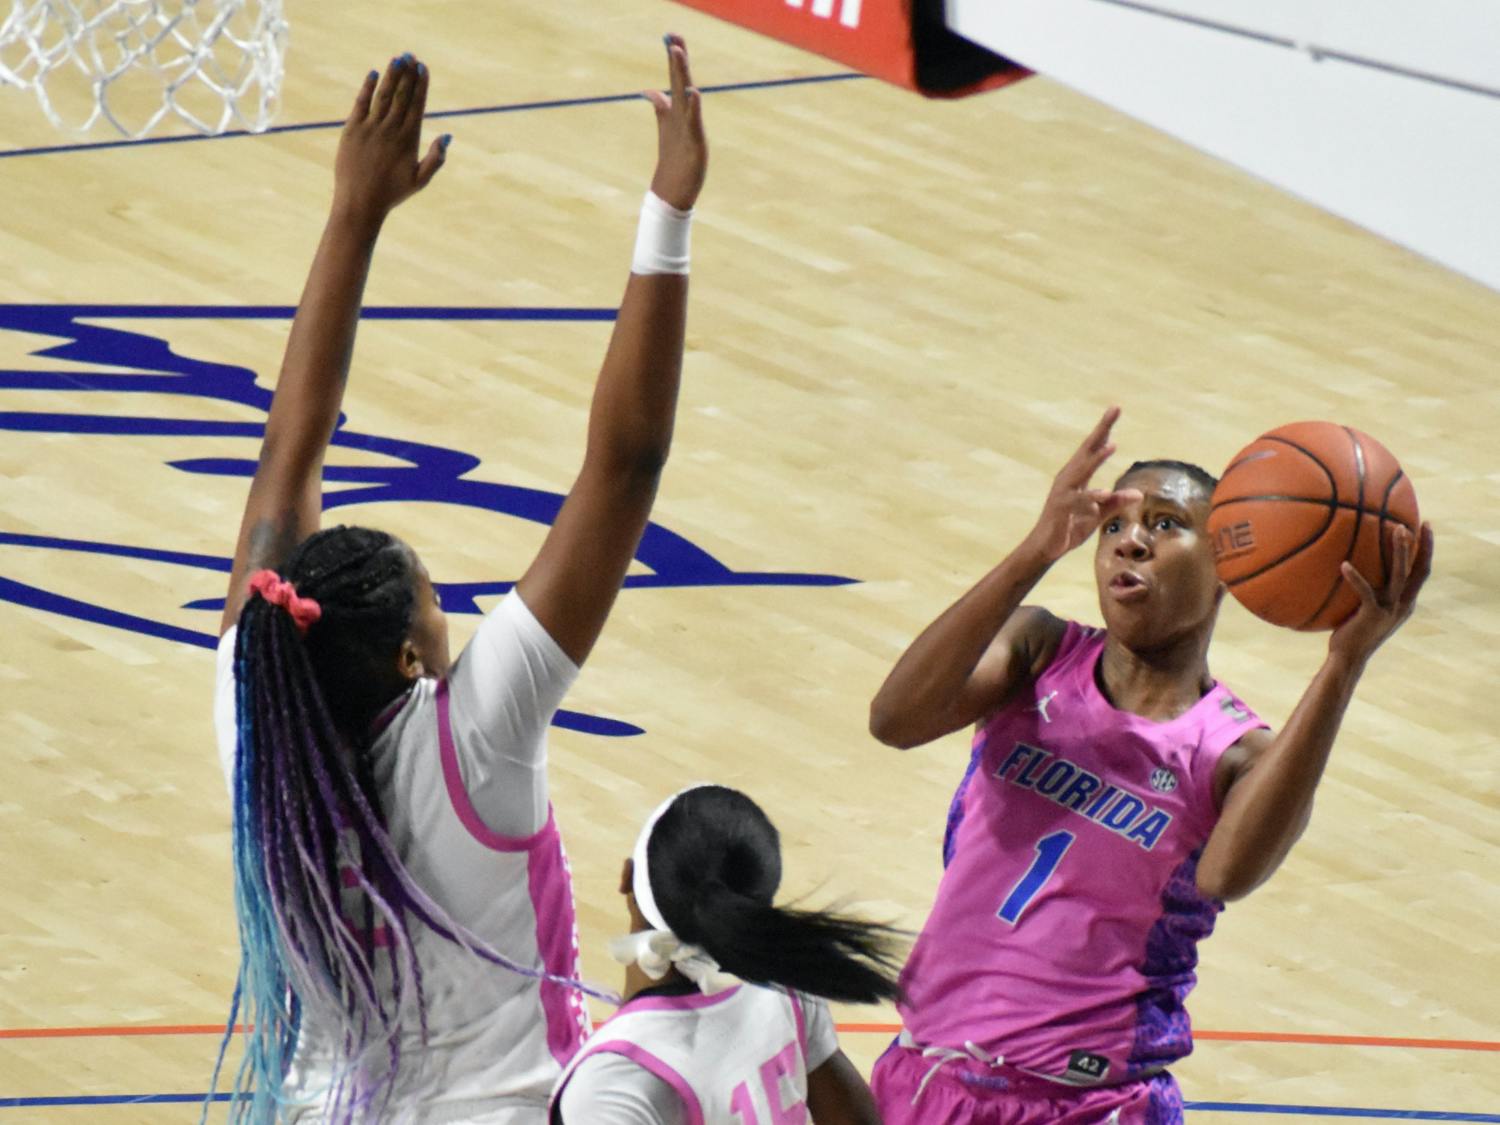 Star guard Kiara Smith led the Gators with 23 points while recording her sixth double-double season Monday night. 